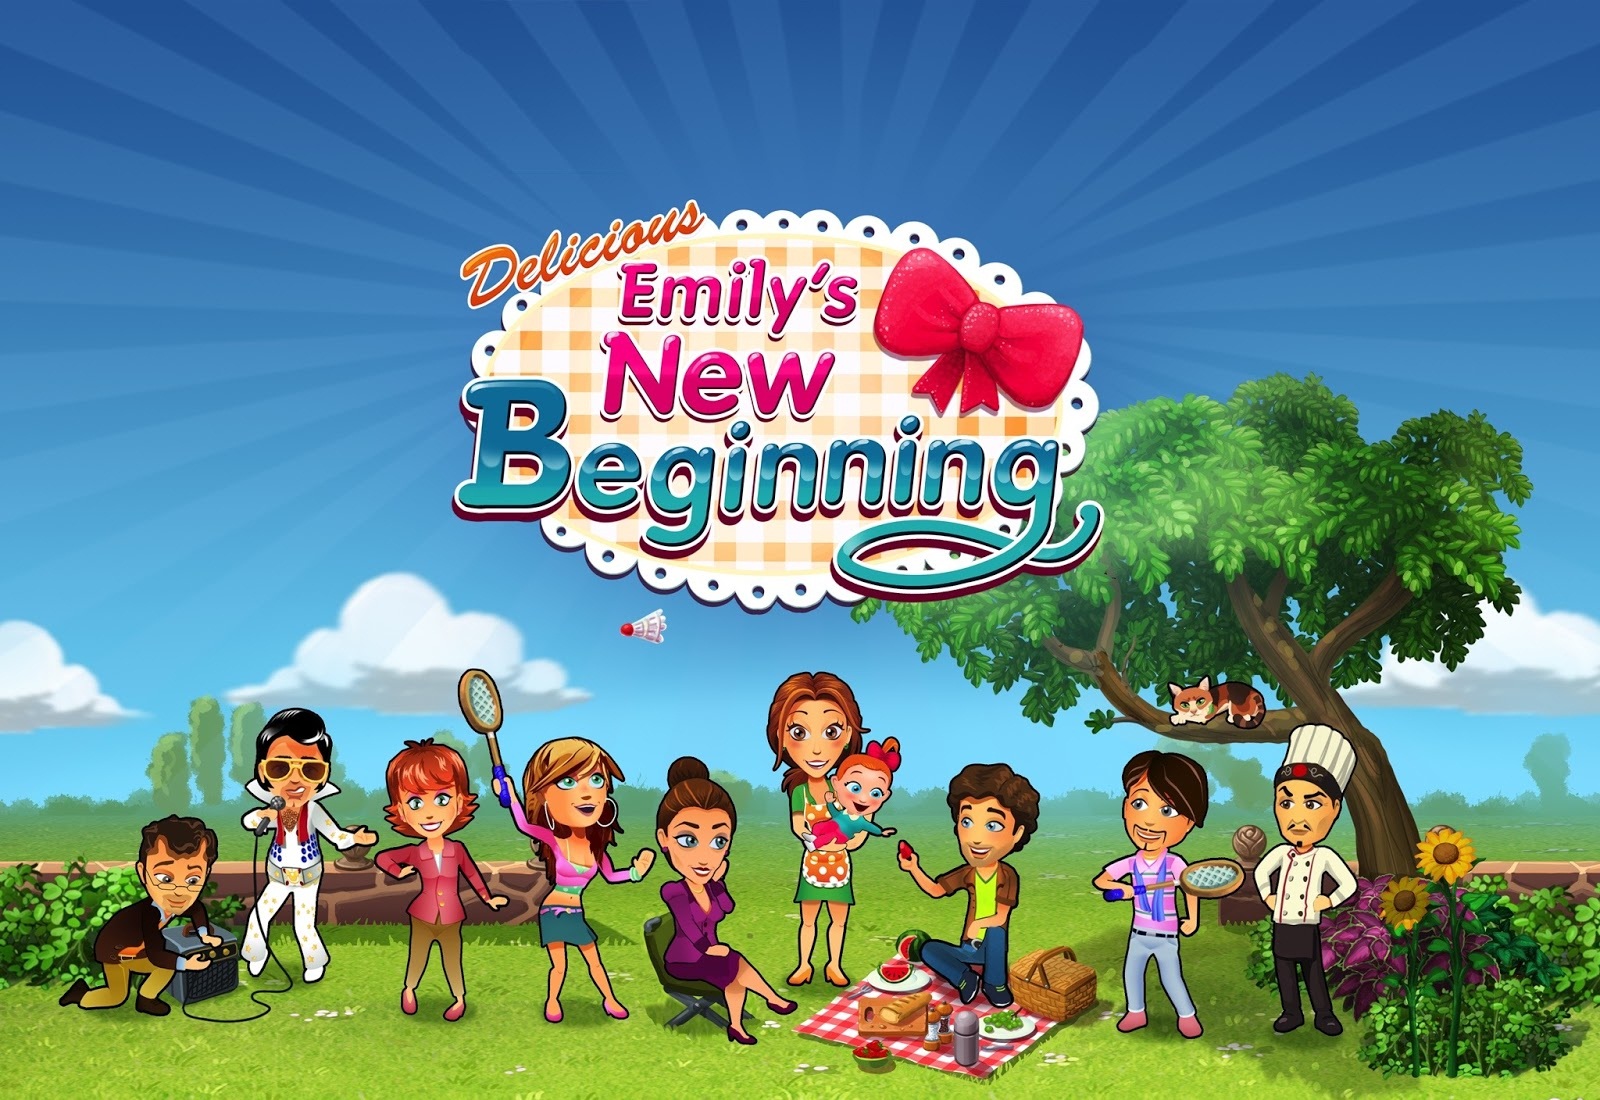 delicious emily new beginning free download full version android